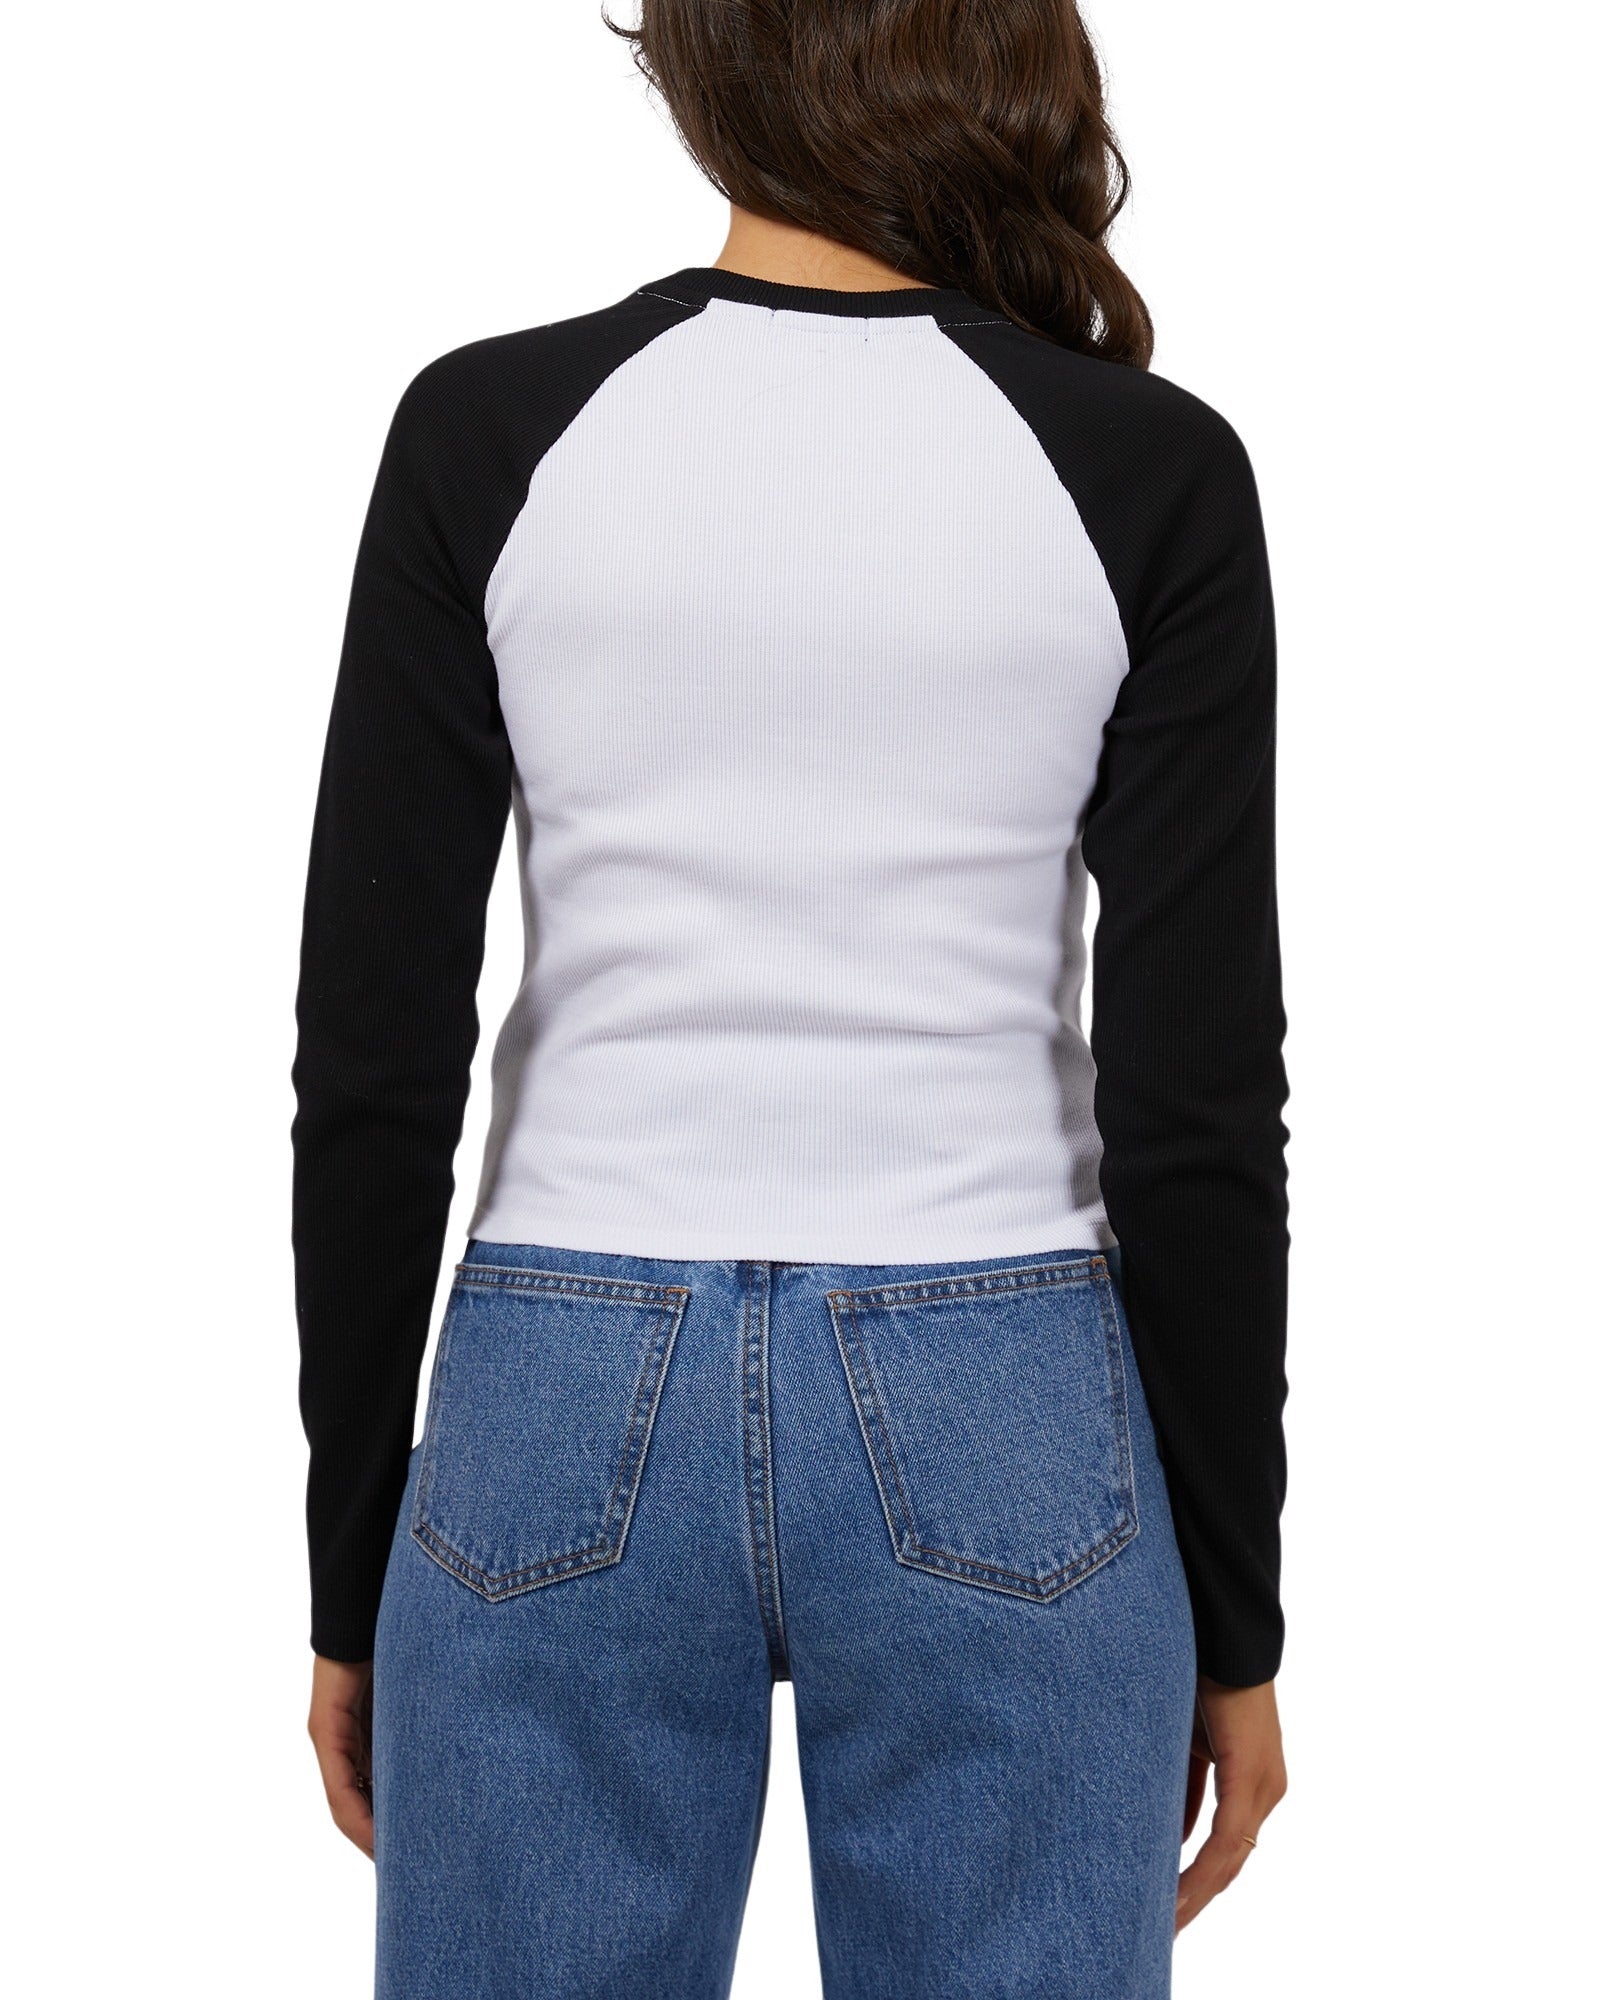 All About Eve - Posie Long Sleeve Tee - Black